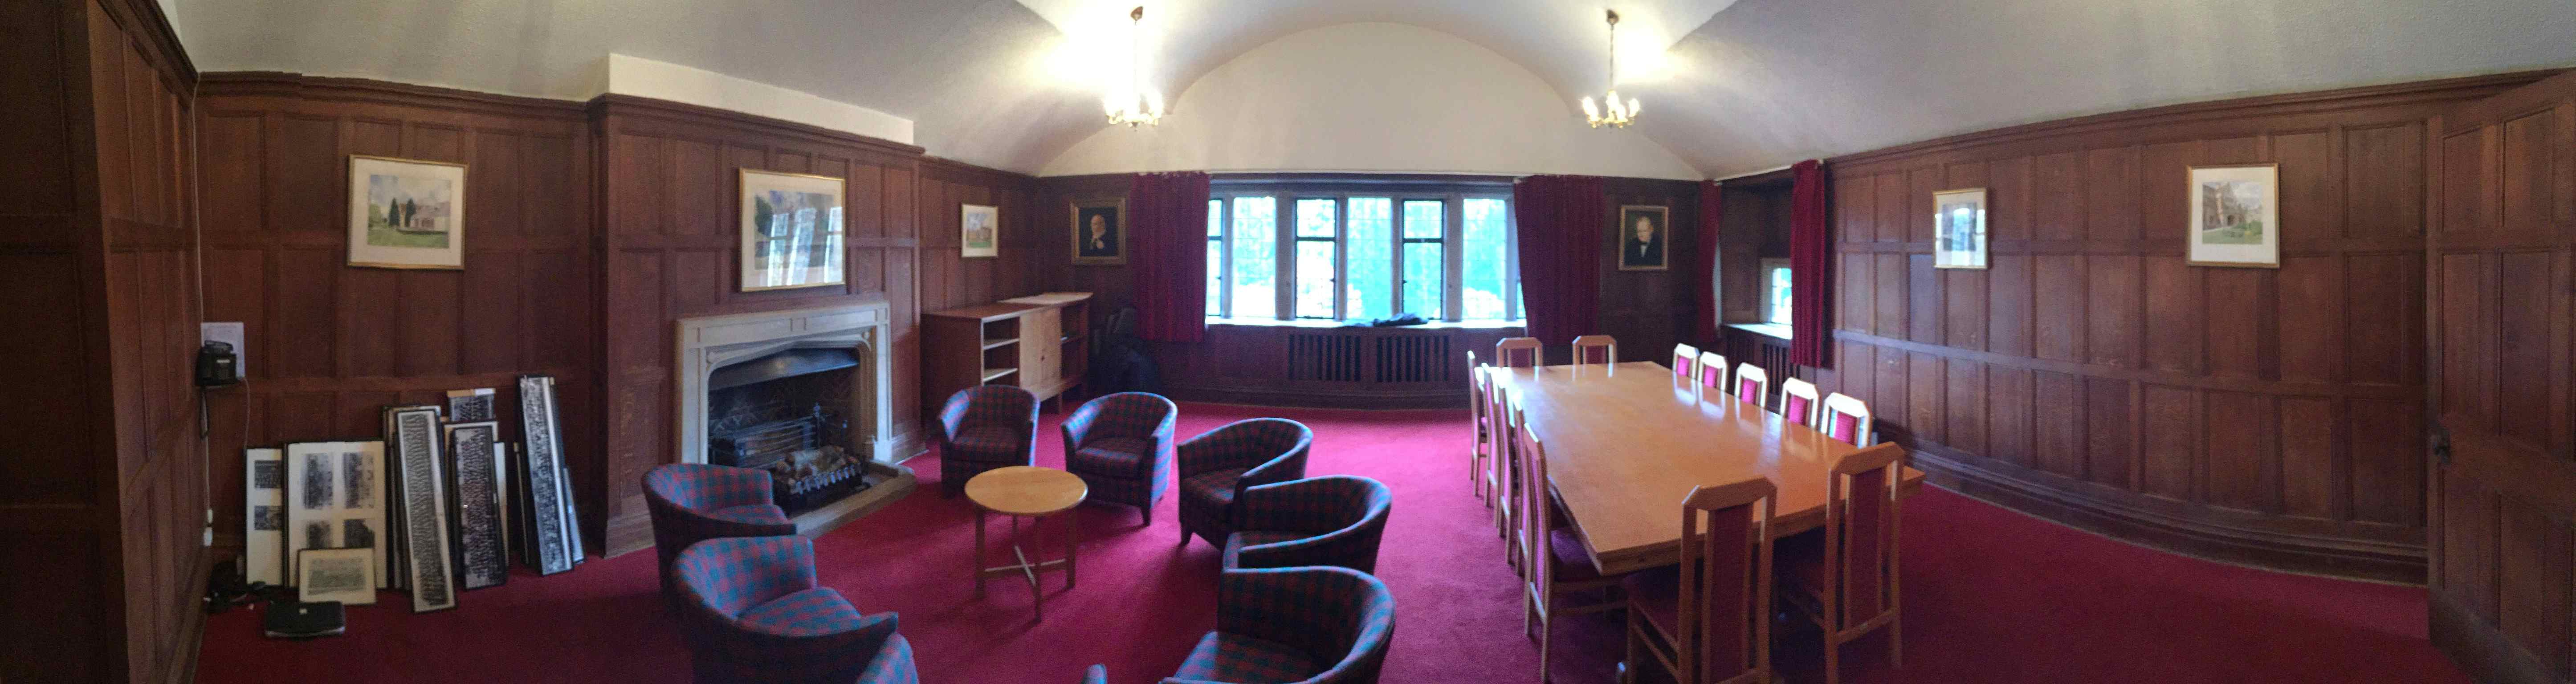 The Boardroom, Wills Hall